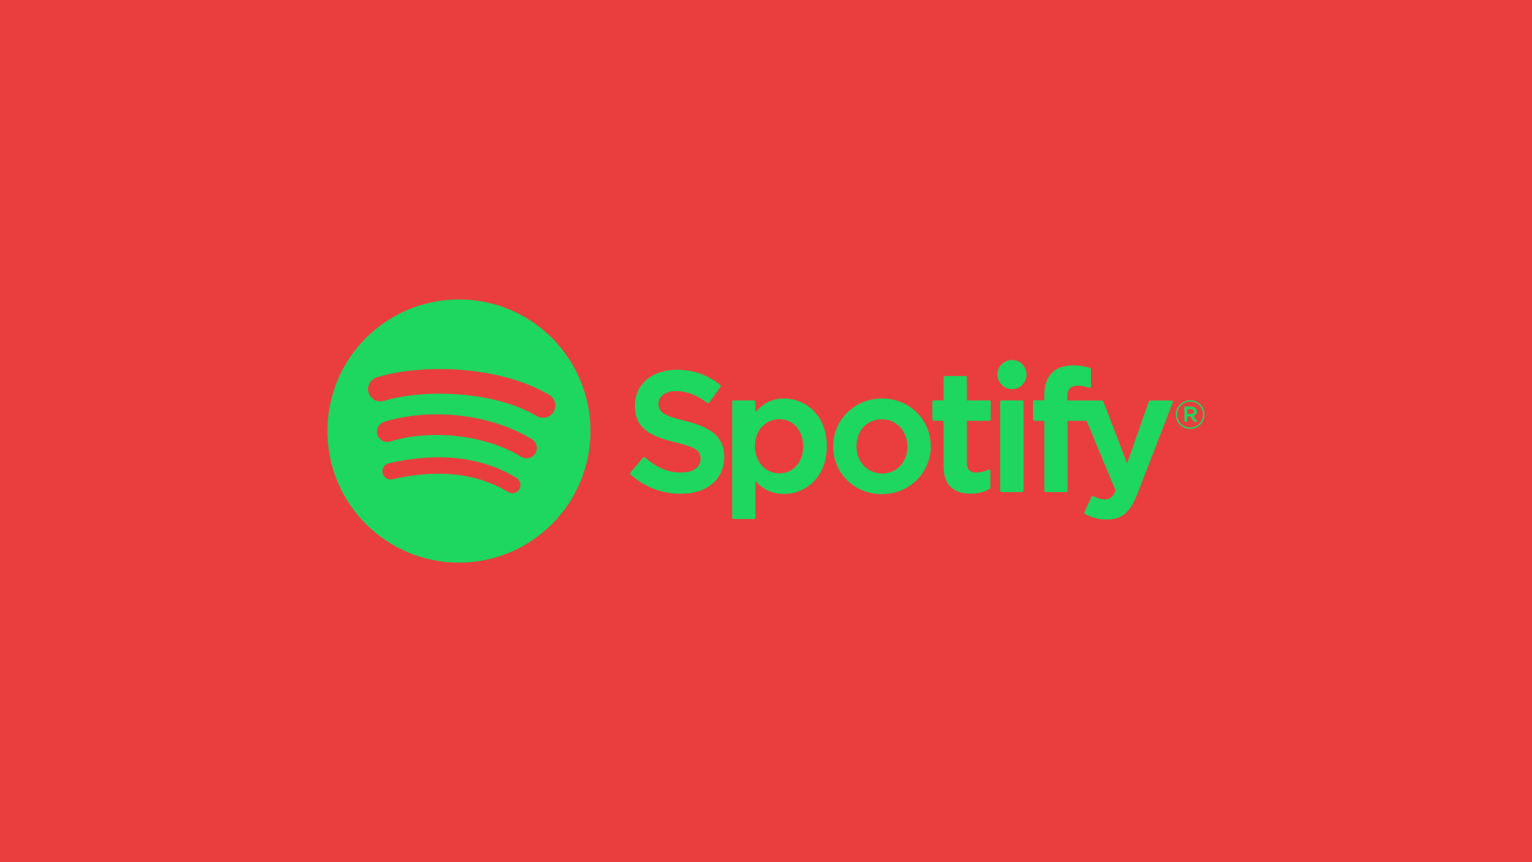 How to Fix Spotify Error Codes 1,2,3,4, 15, 16, 17, and 18?